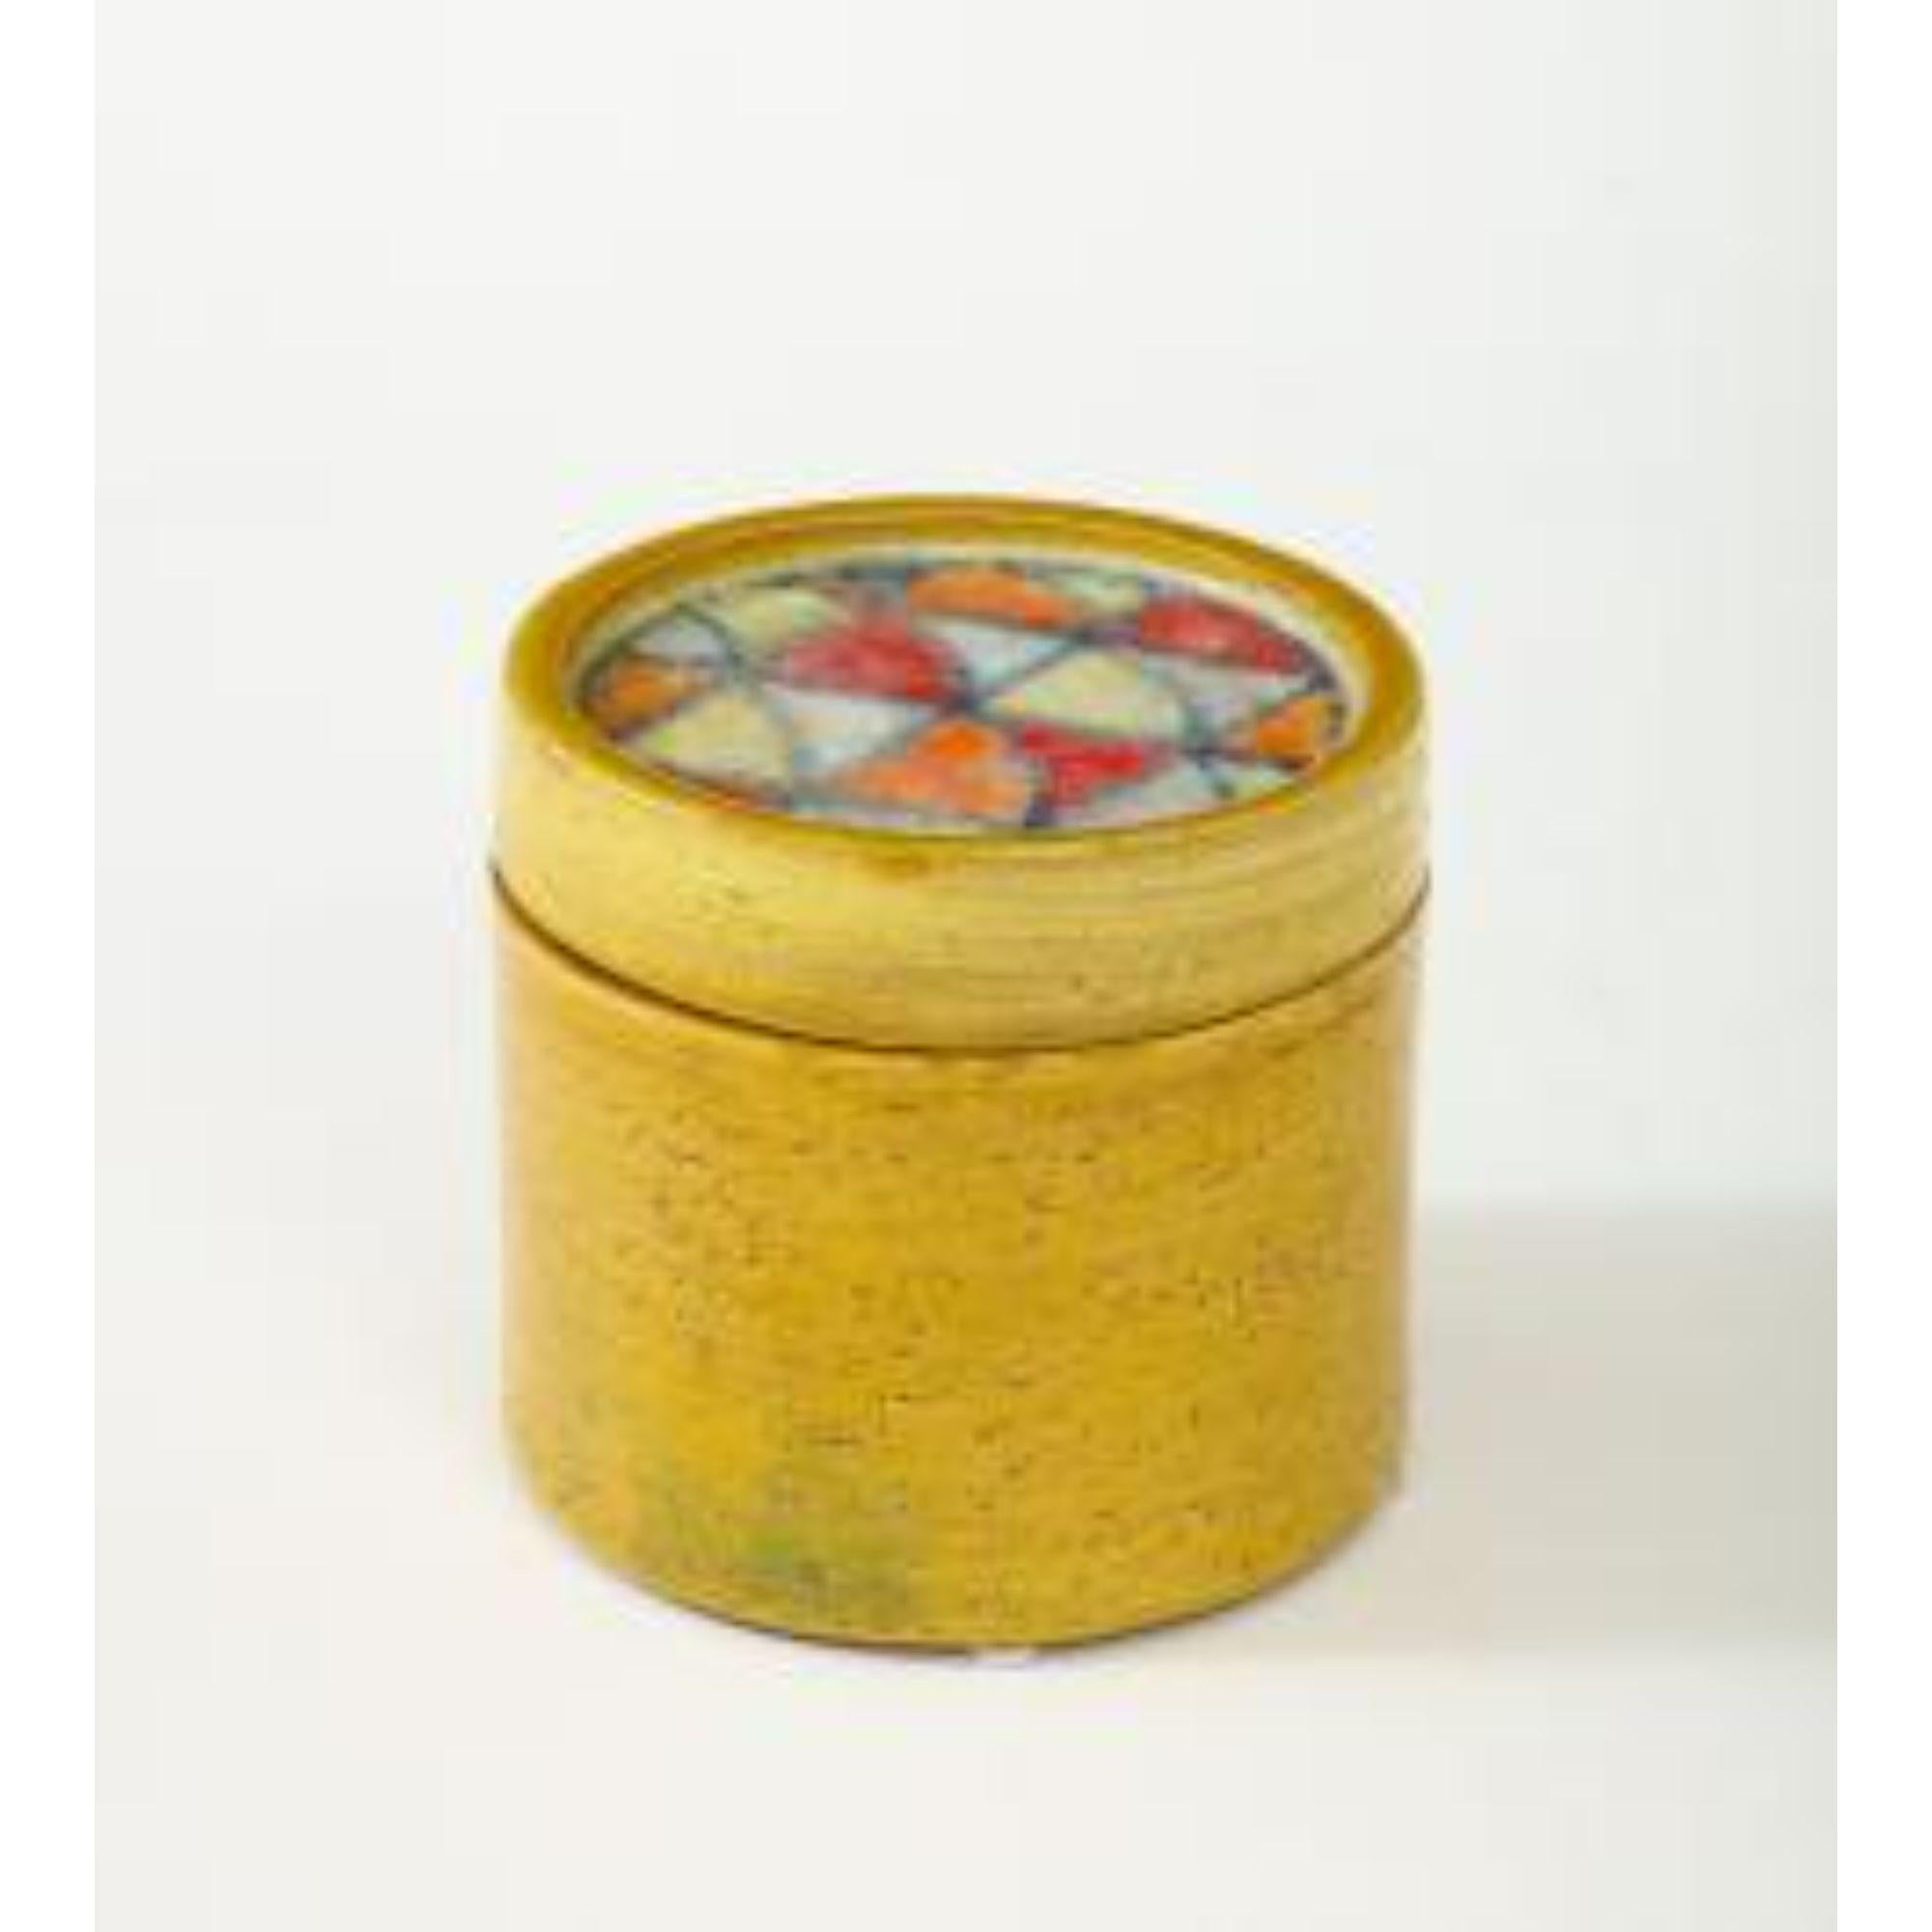 Bitossi Lidded Box in Glazed Ceramic with Fused Glass Mosaic, circa 1960s In Good Condition For Sale In New York City, NY